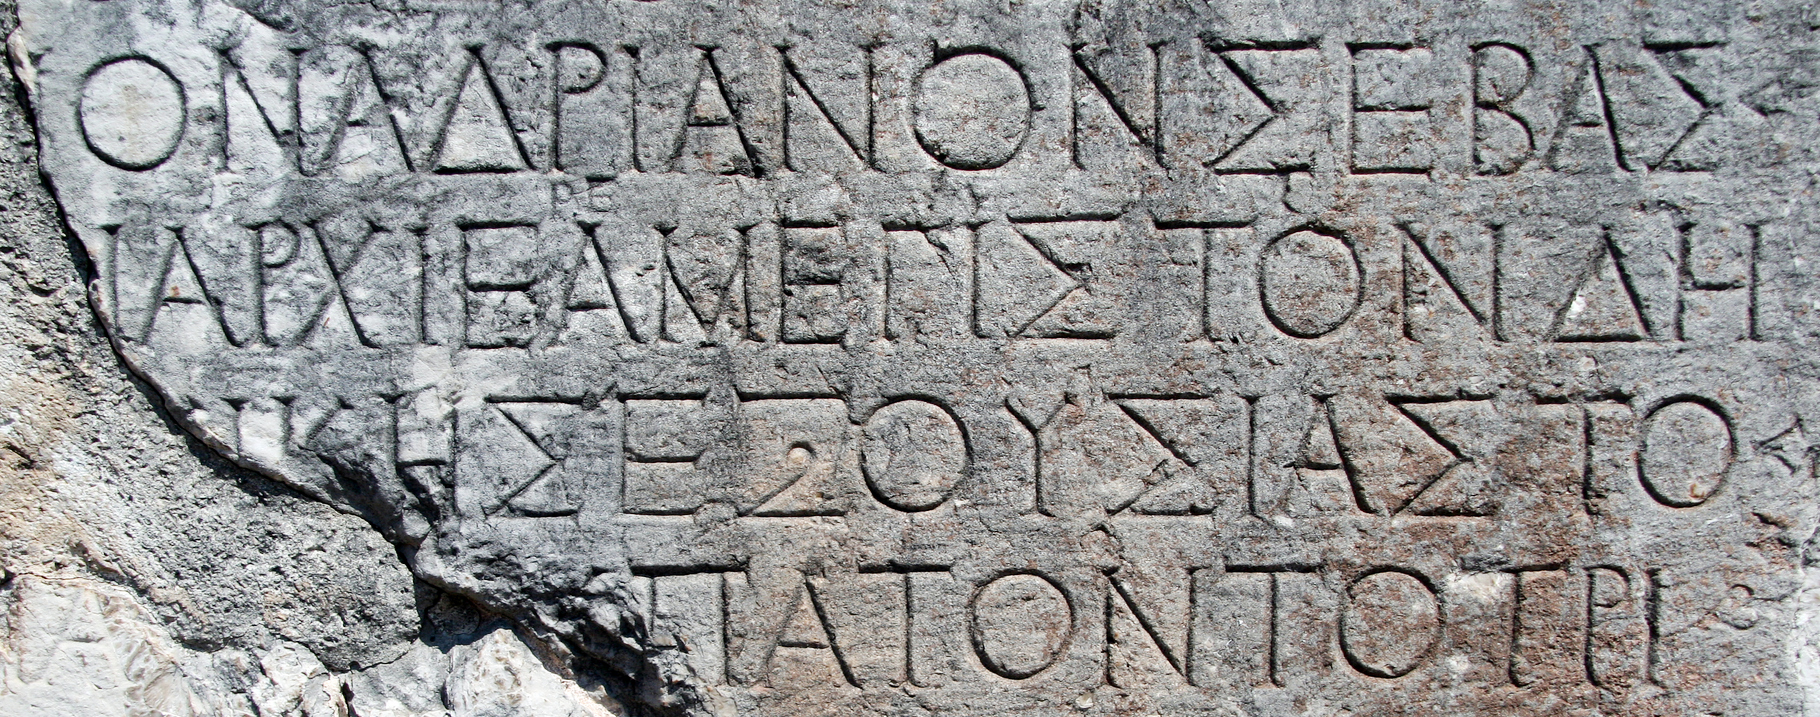 Example of ancient Greek writing in stone. Photographer: Kirk Siang. Licensed: Attribution-NonCommercial-NoDerivs 2.0 Generic (CC BY-NC-ND 2.0)